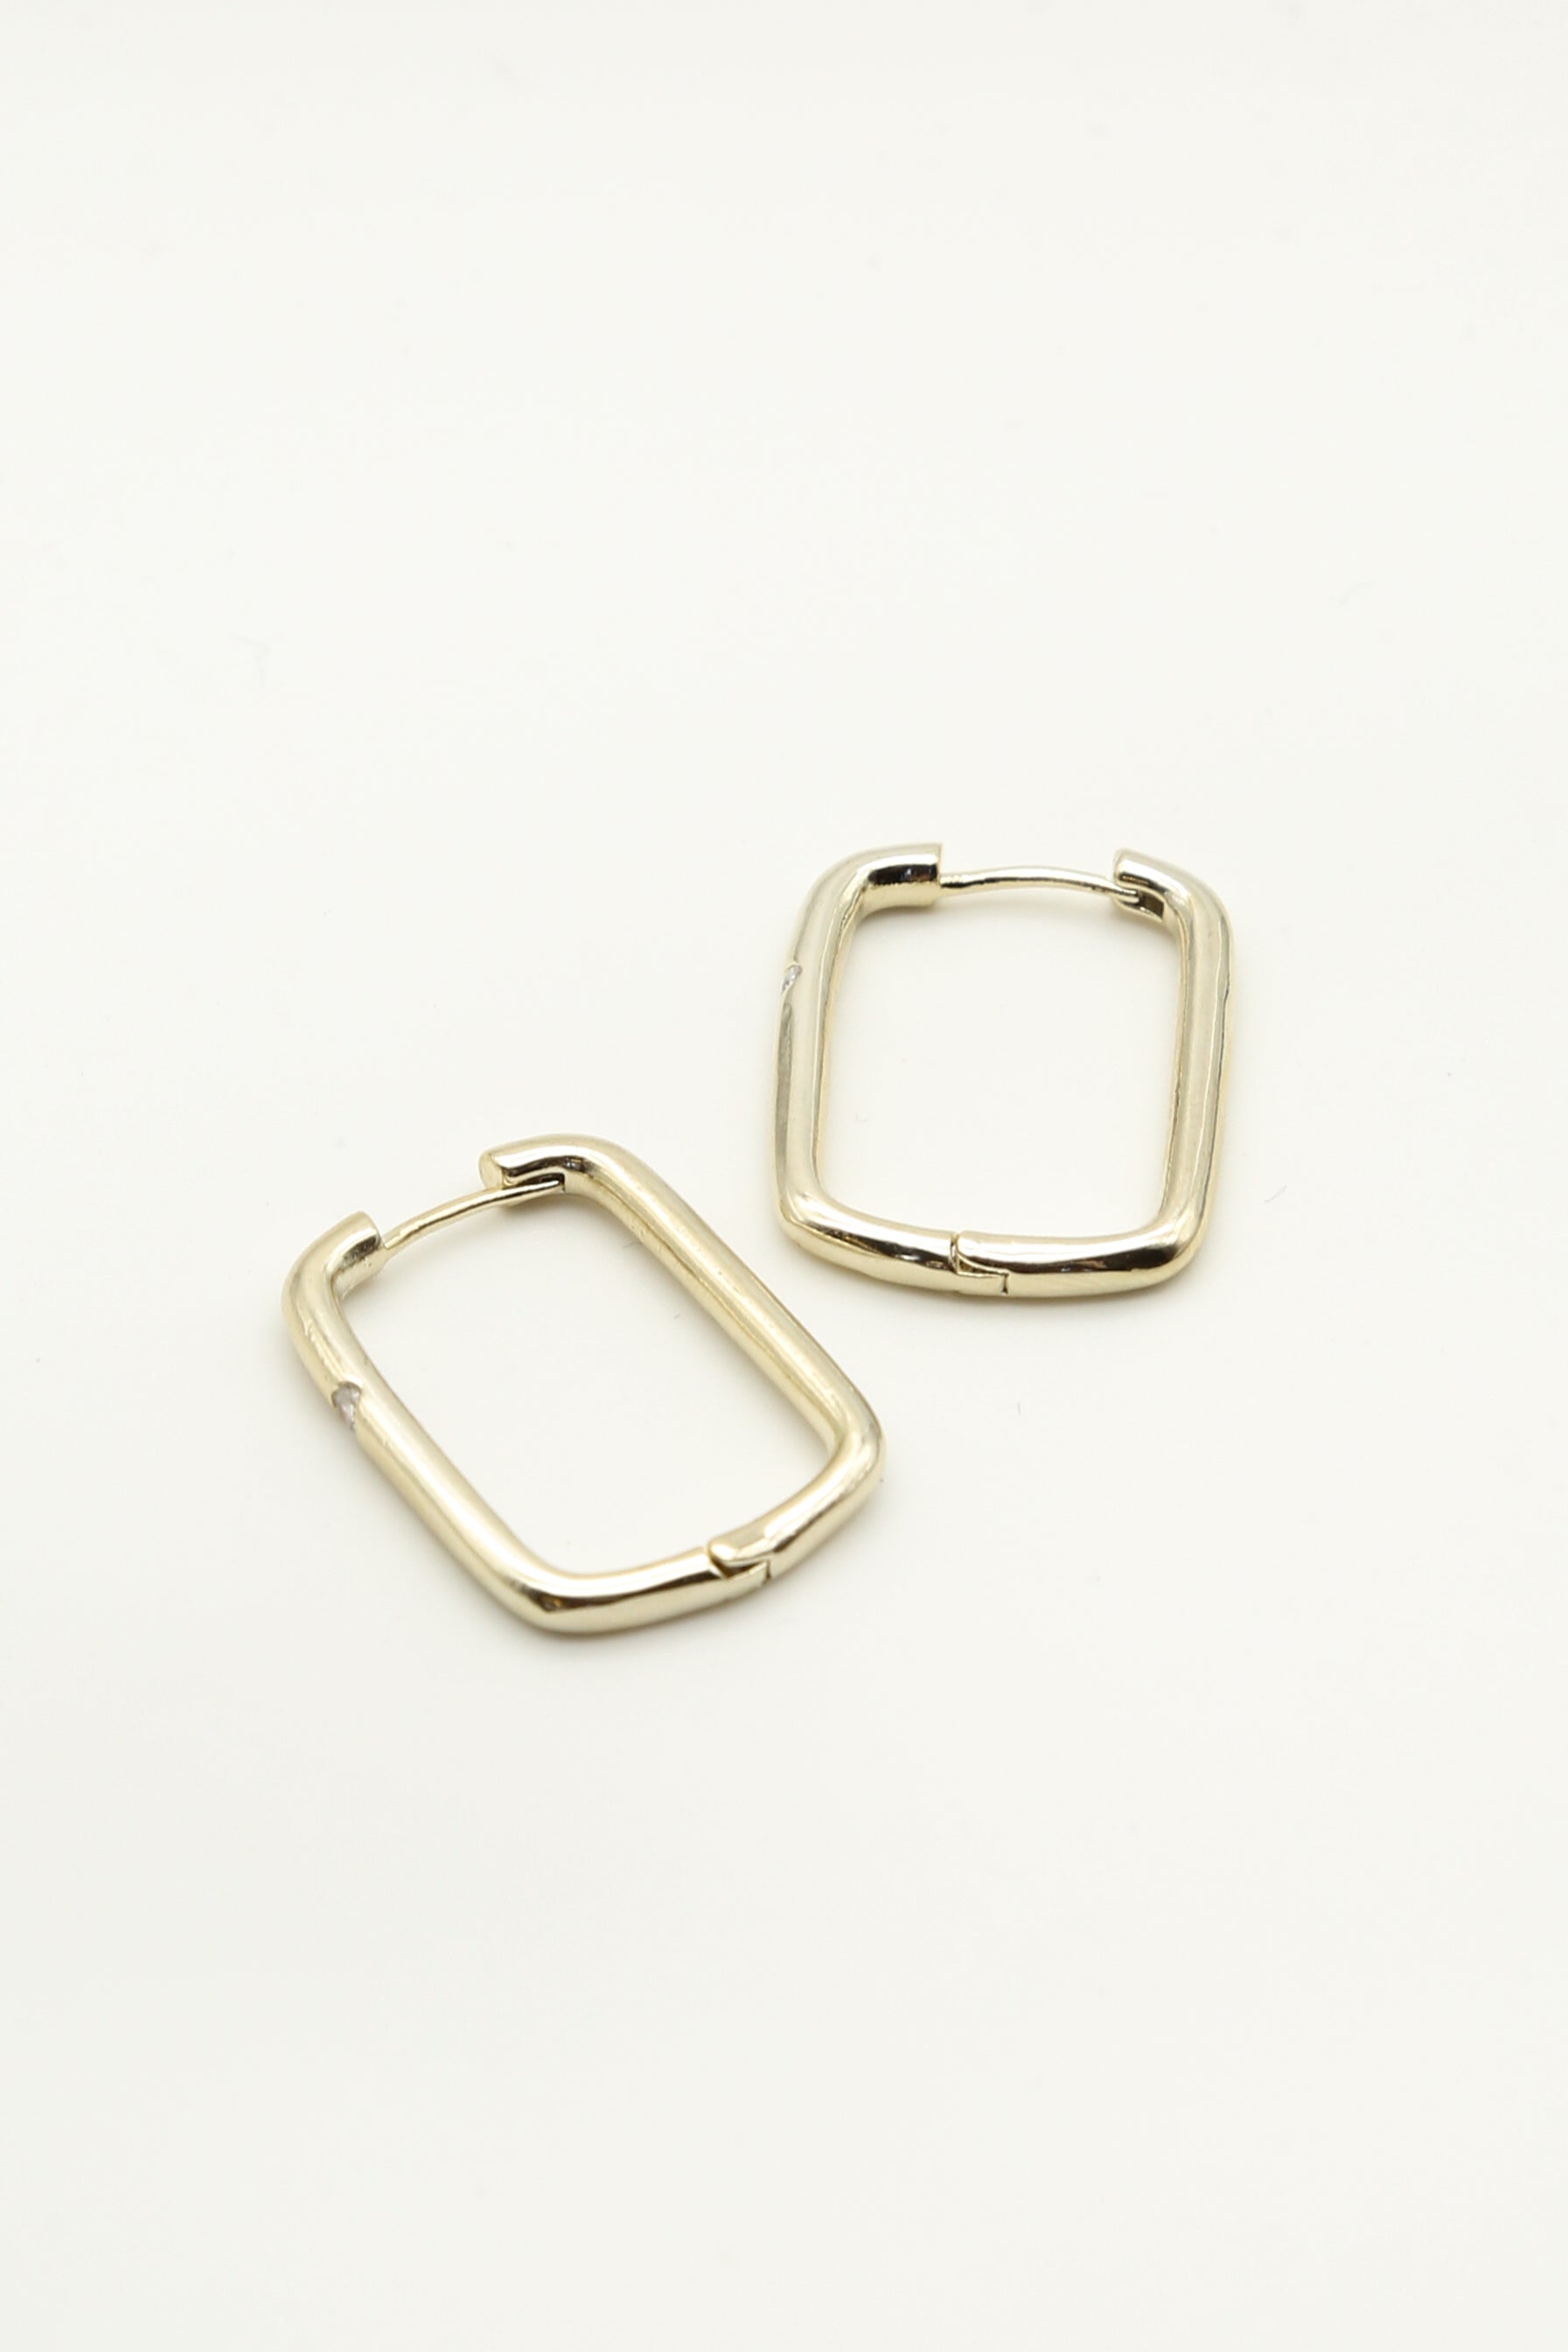 Gold Rounded Edge Square Hoop Earrings